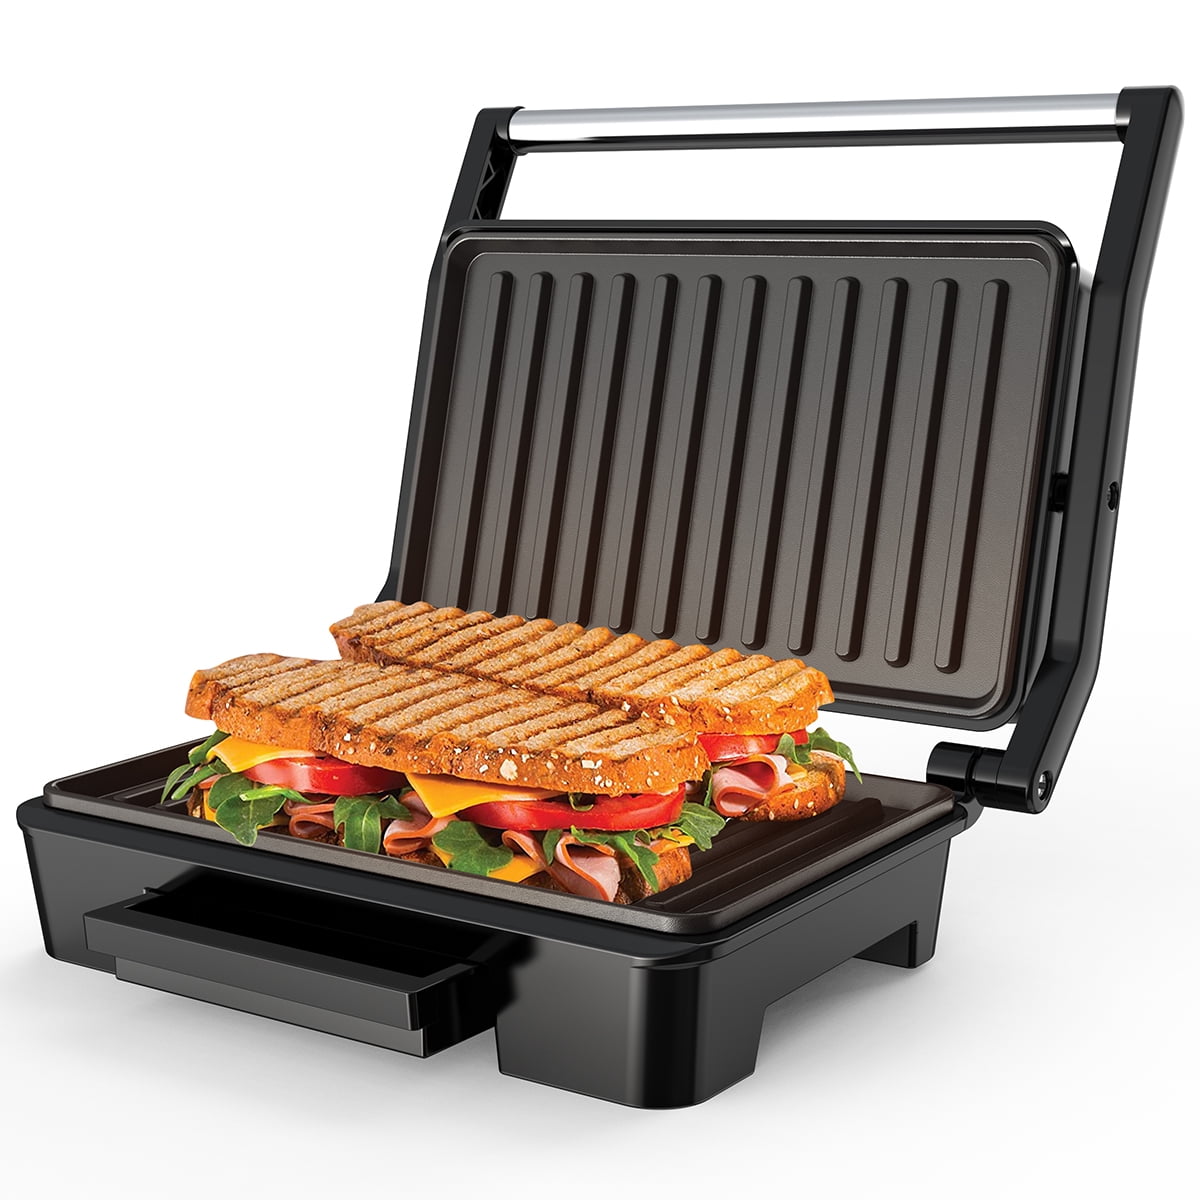 Panini Press Grill, Stainless Steel Maker with Double Non-Stick Coated Plates & Removable Drip Tray, 10.6" W 8.7" H 3.5" D) - Walmart.com